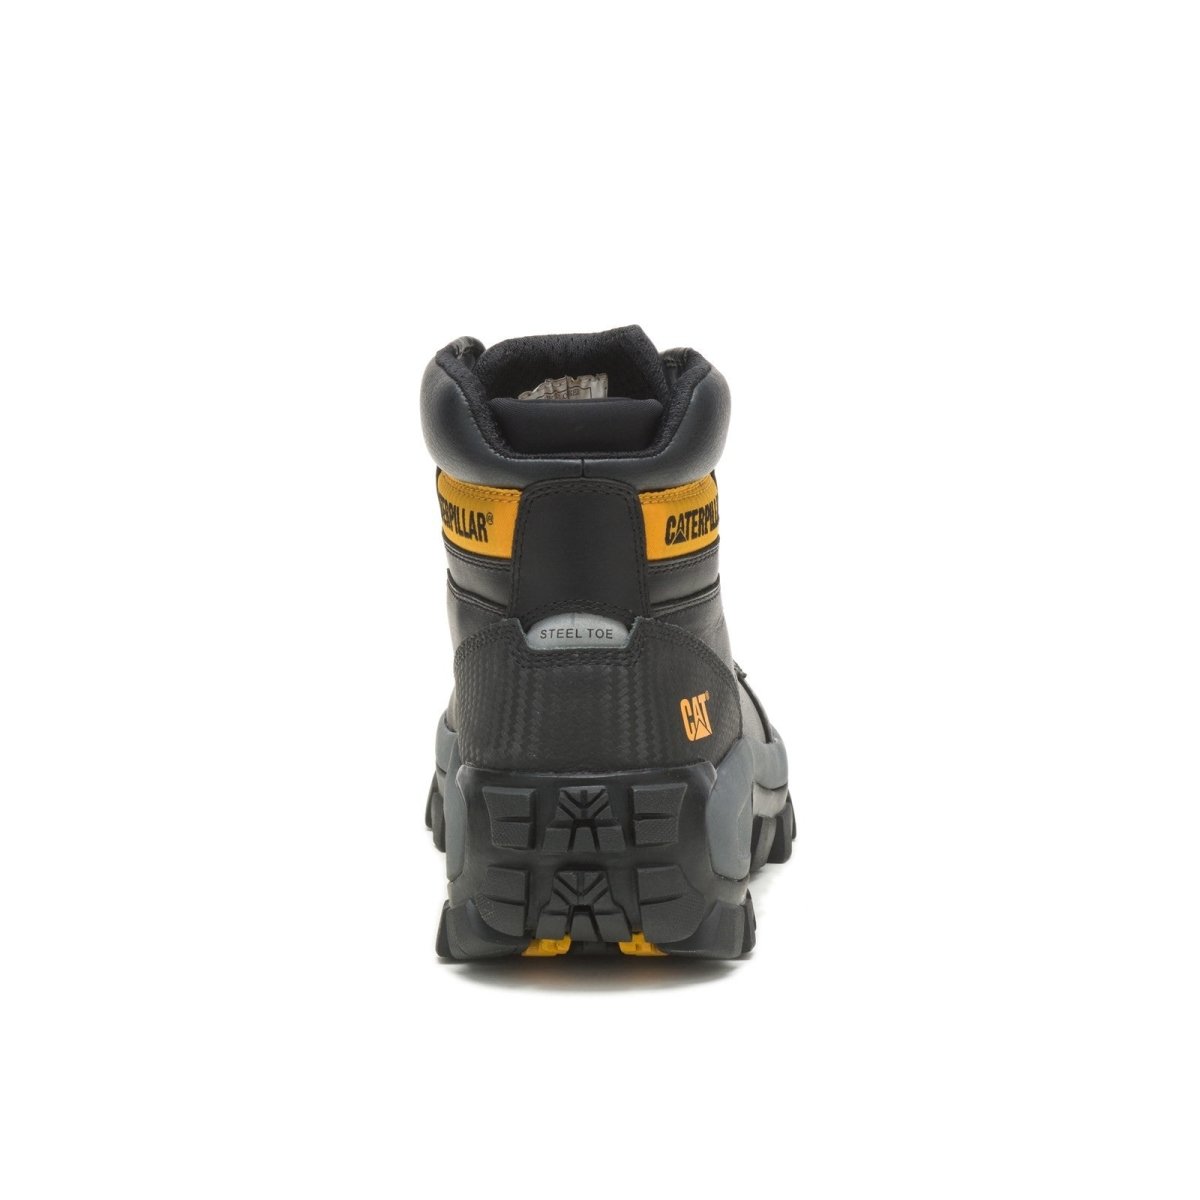 Caterpillar Invader Steel Toe Safety Hiker Boots - Shoe Store Direct